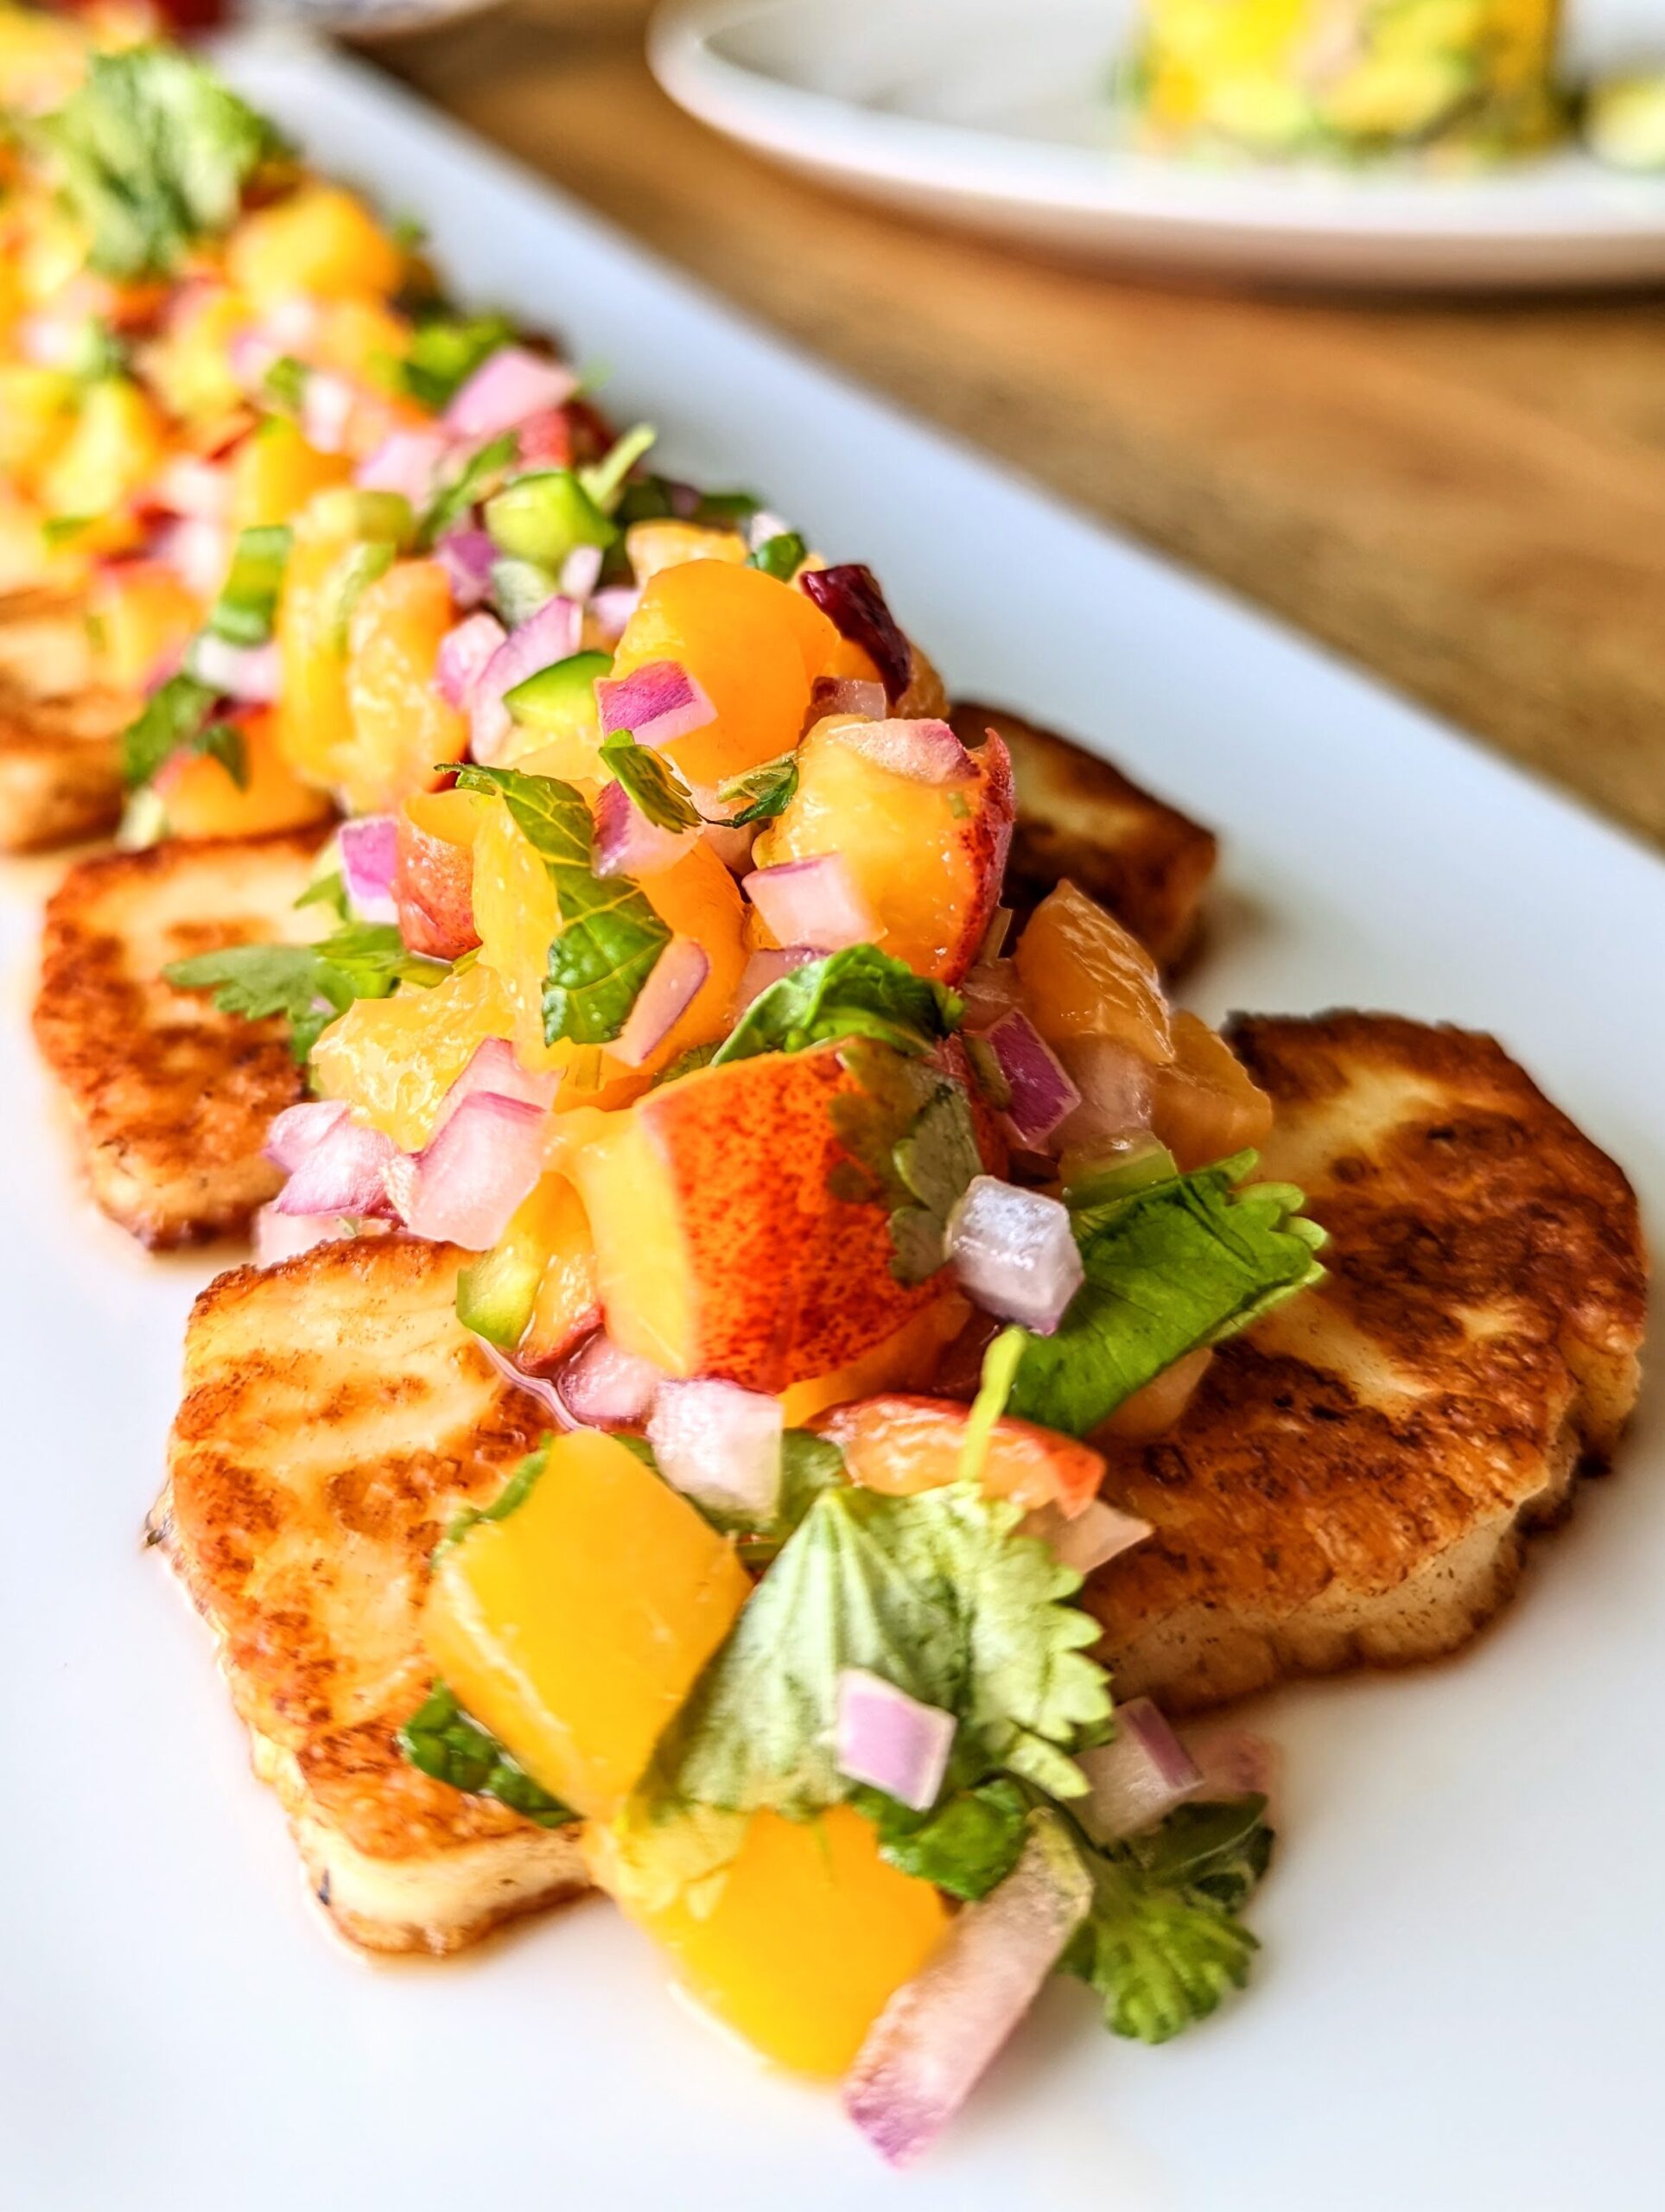 A close-up table view of grilled halloumi and peach salsa.